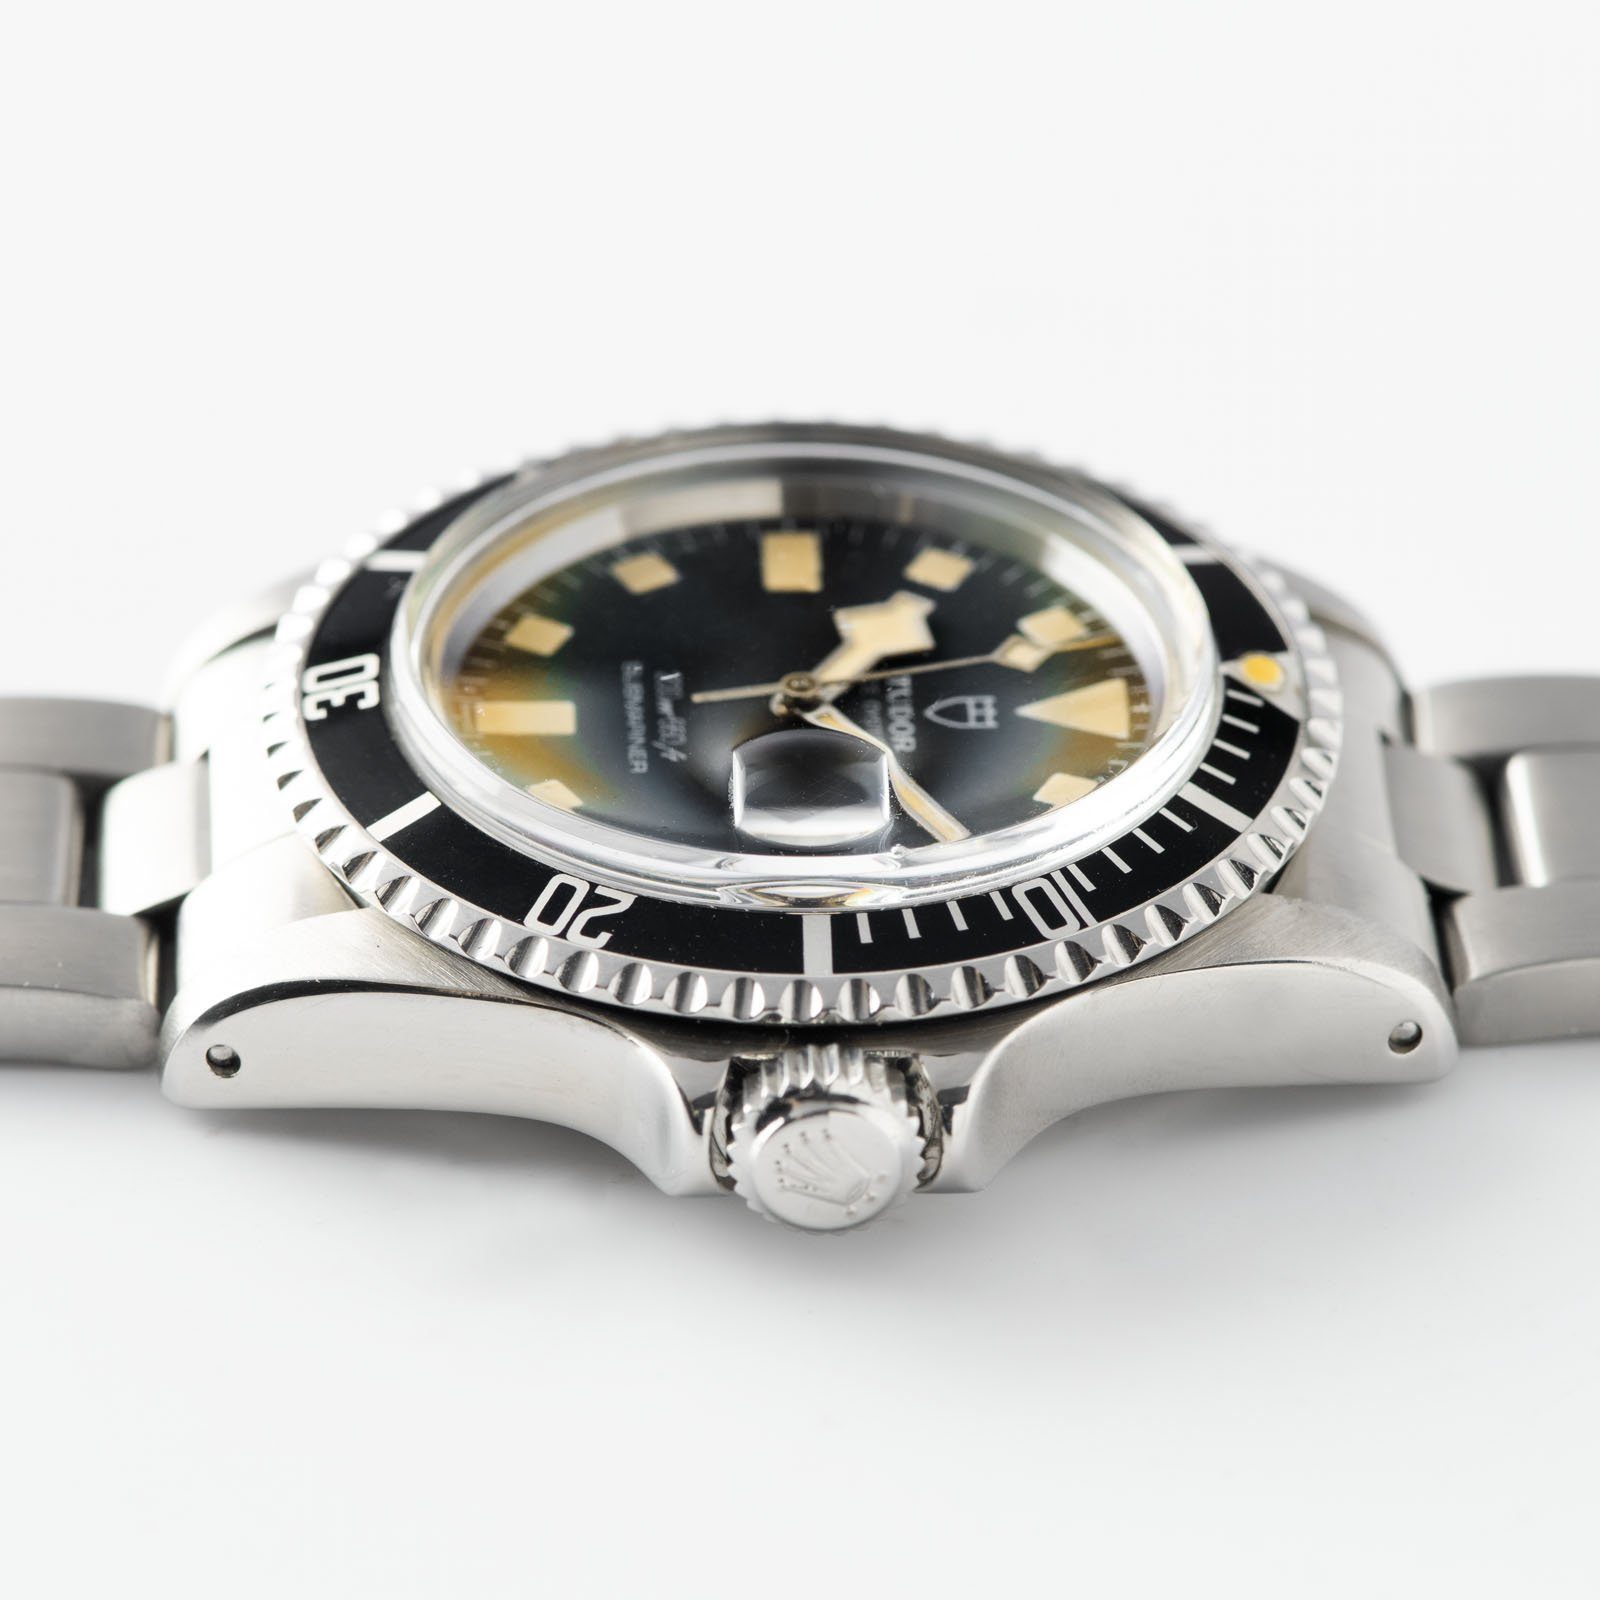 Tudor Submariner Date Snowflake 9411/0 Box and Papers